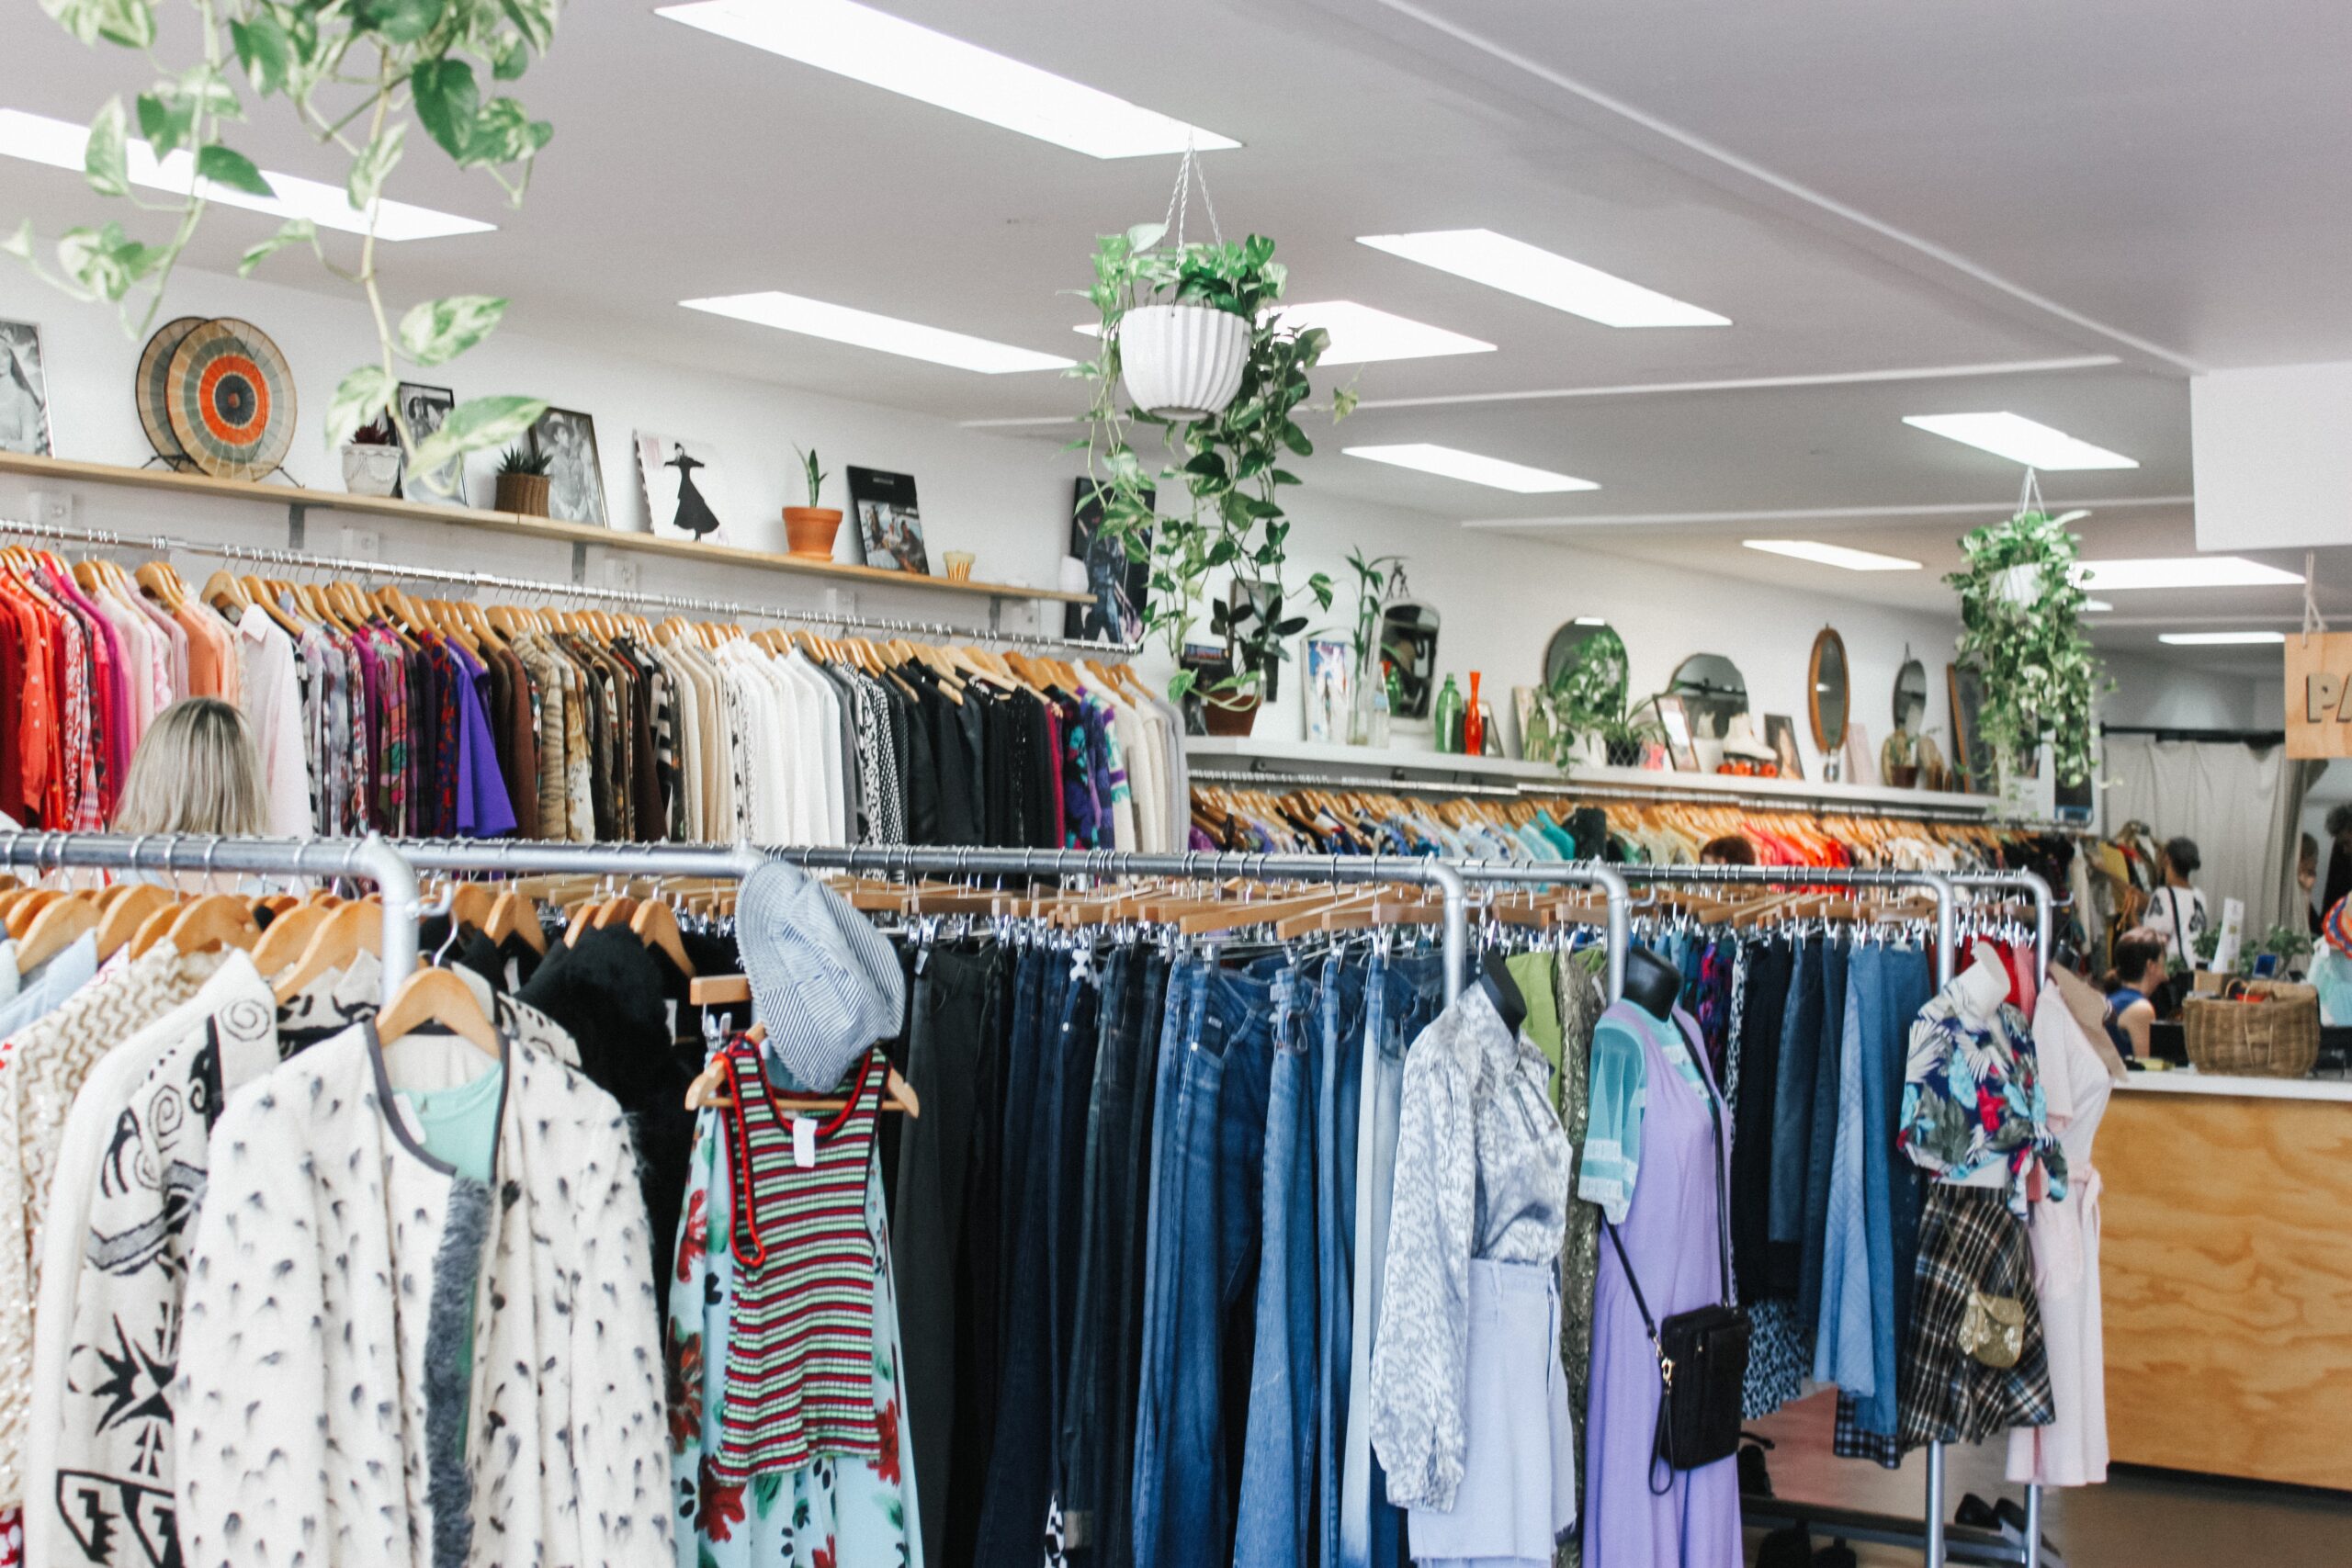 Charity shop with neatly organized clothes and accessories, showcasing the vibrant community support facilitated by GiftAider for efficient Gift Aid claims.